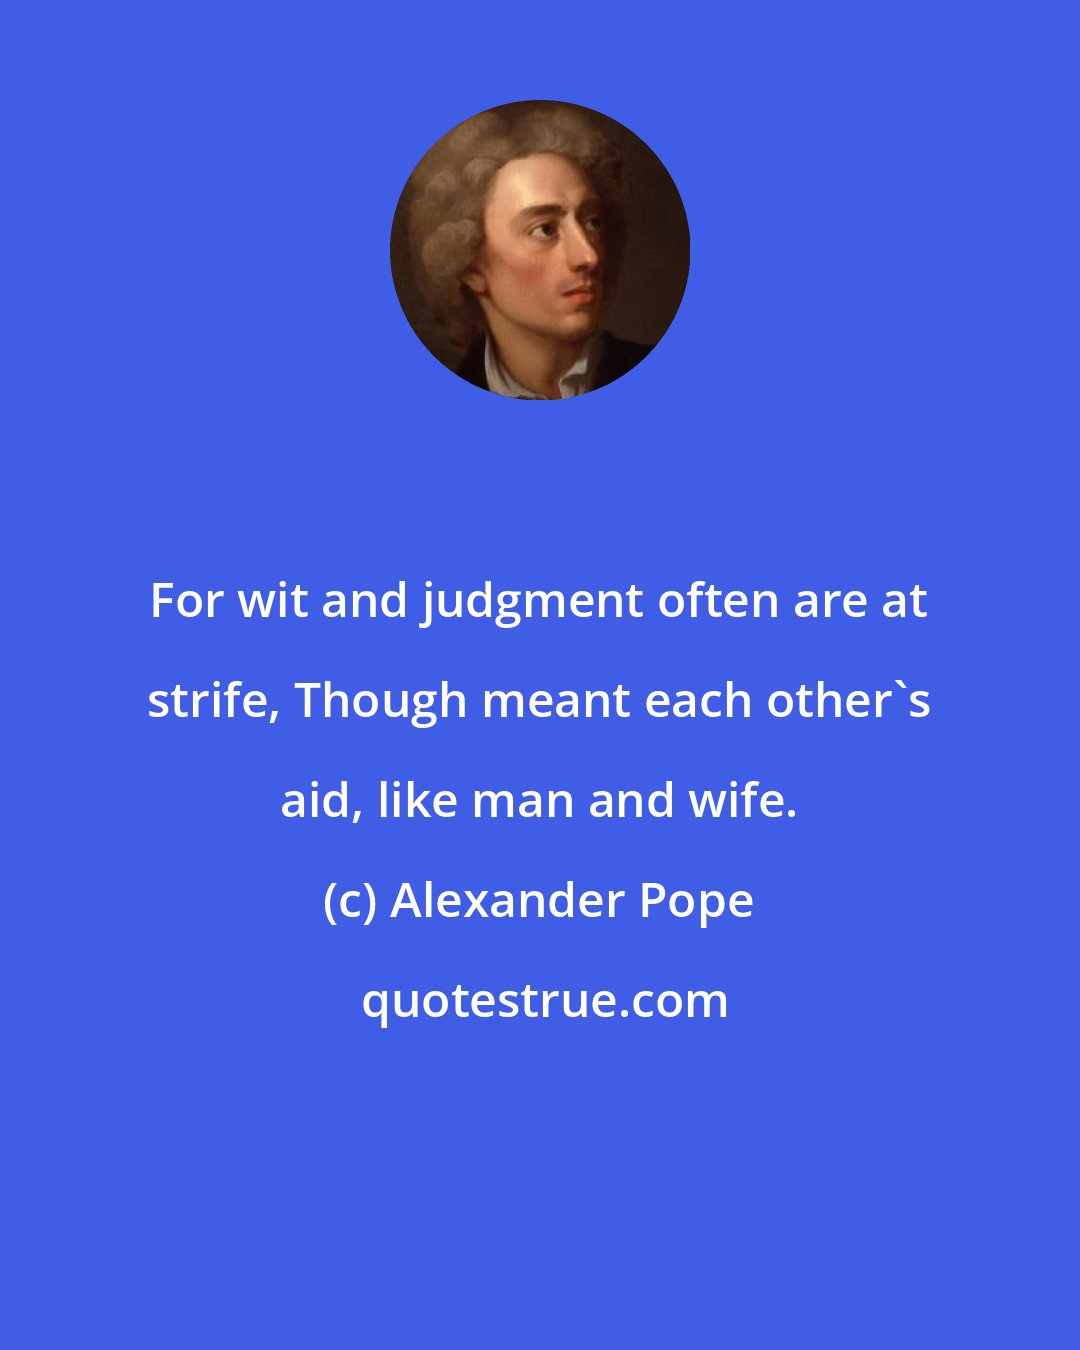 Alexander Pope: For wit and judgment often are at strife, Though meant each other's aid, like man and wife.